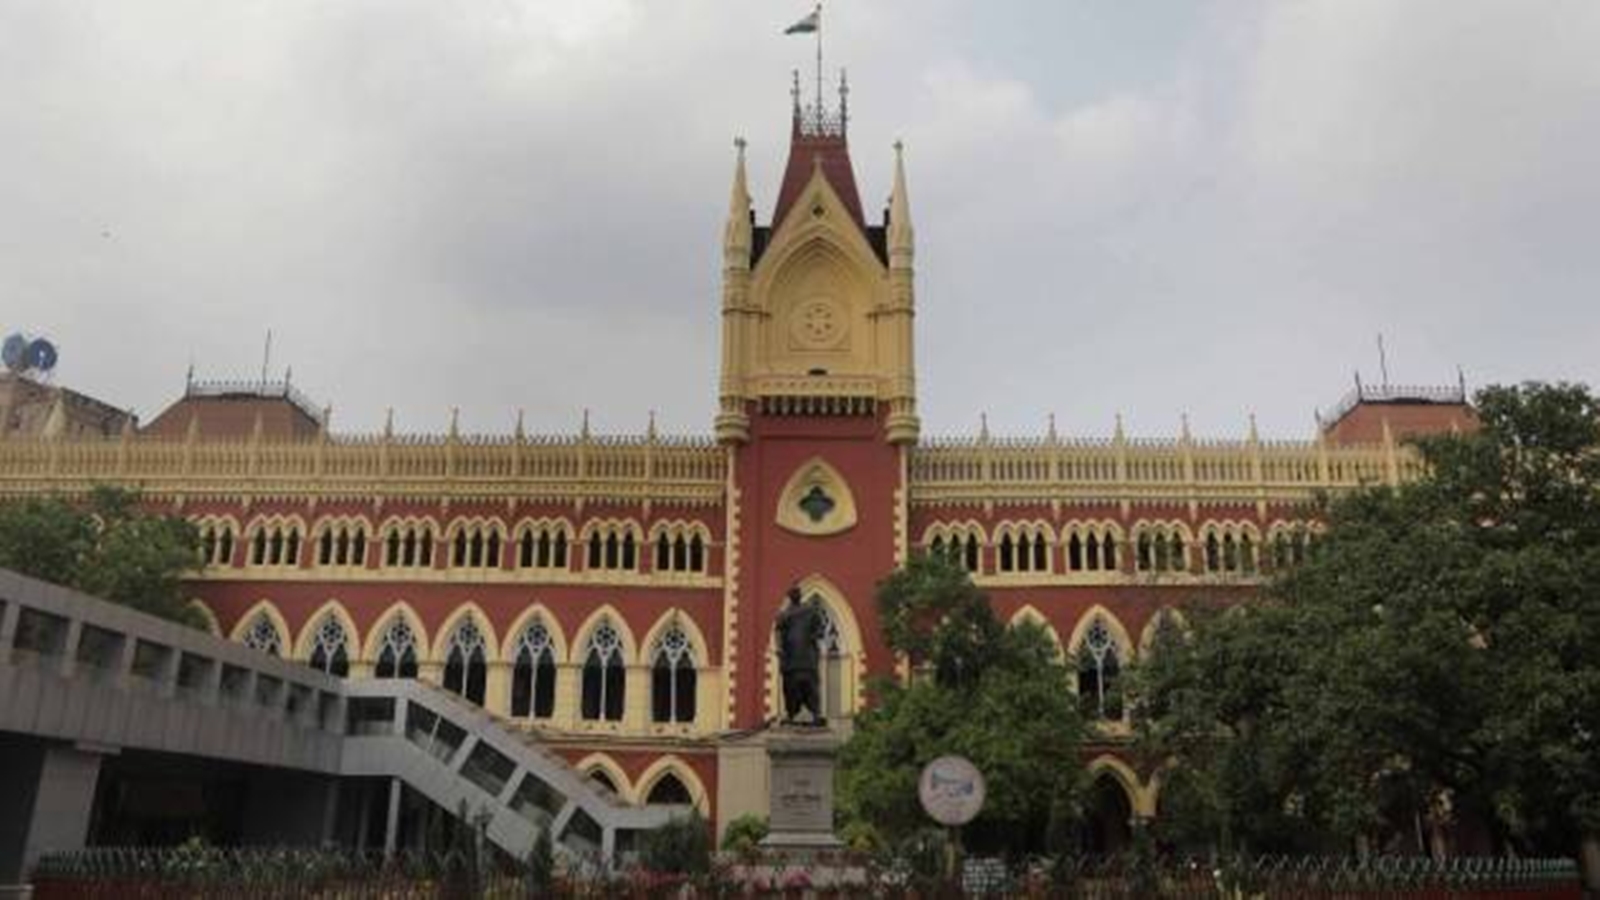 School jobs scam: Calcutta HC asks  state to decide on granting sanction to prosecute accused by May 2